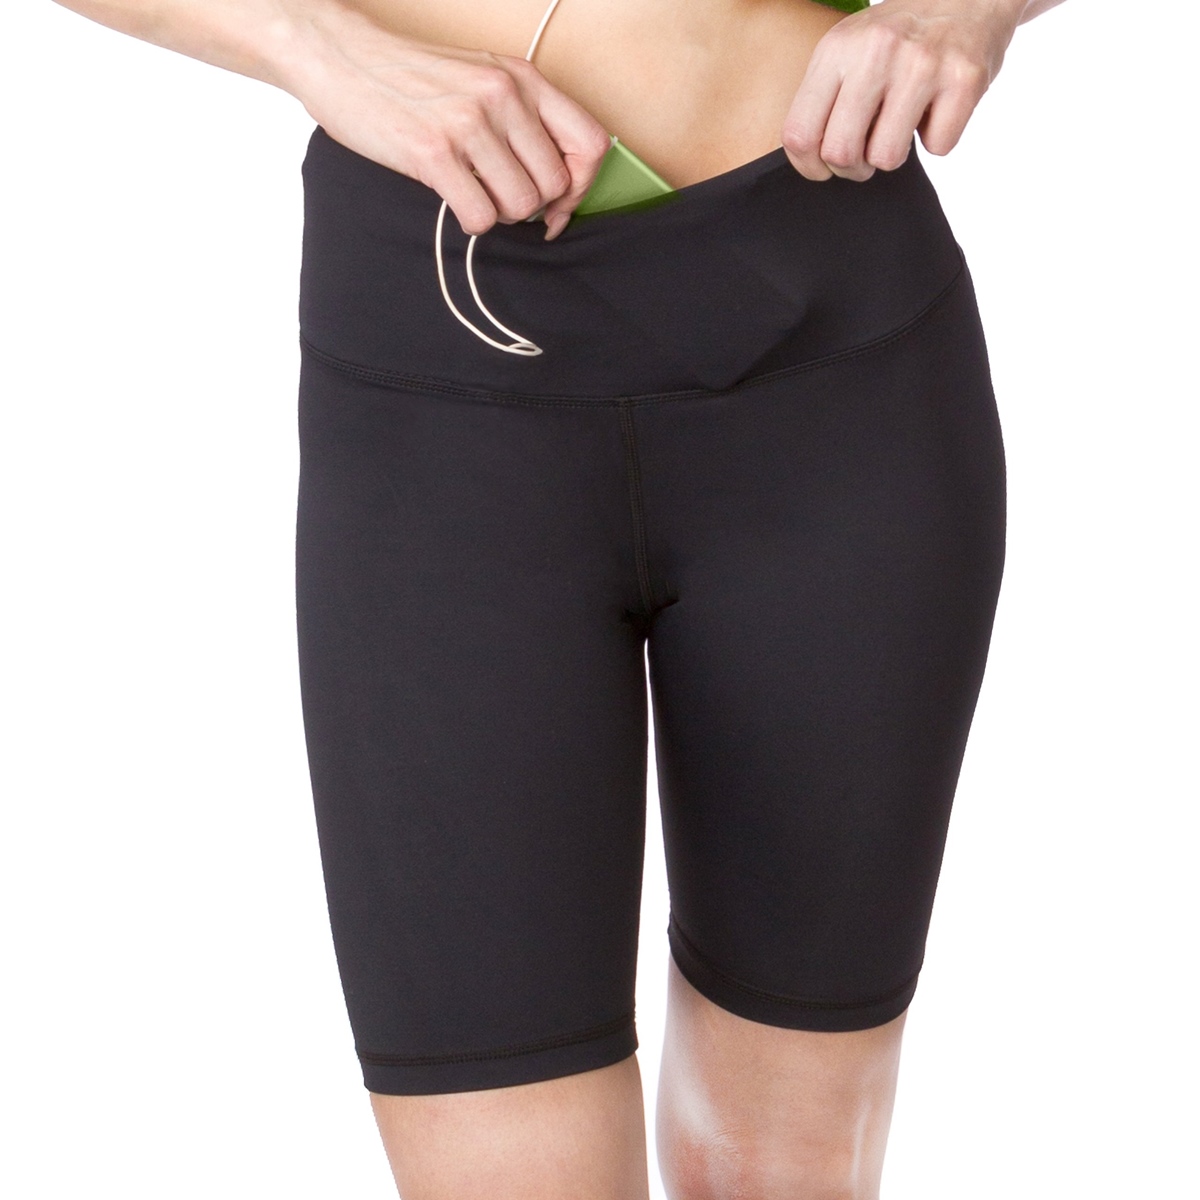 10 Amazing Women’s Long Compression Shorts For 2023